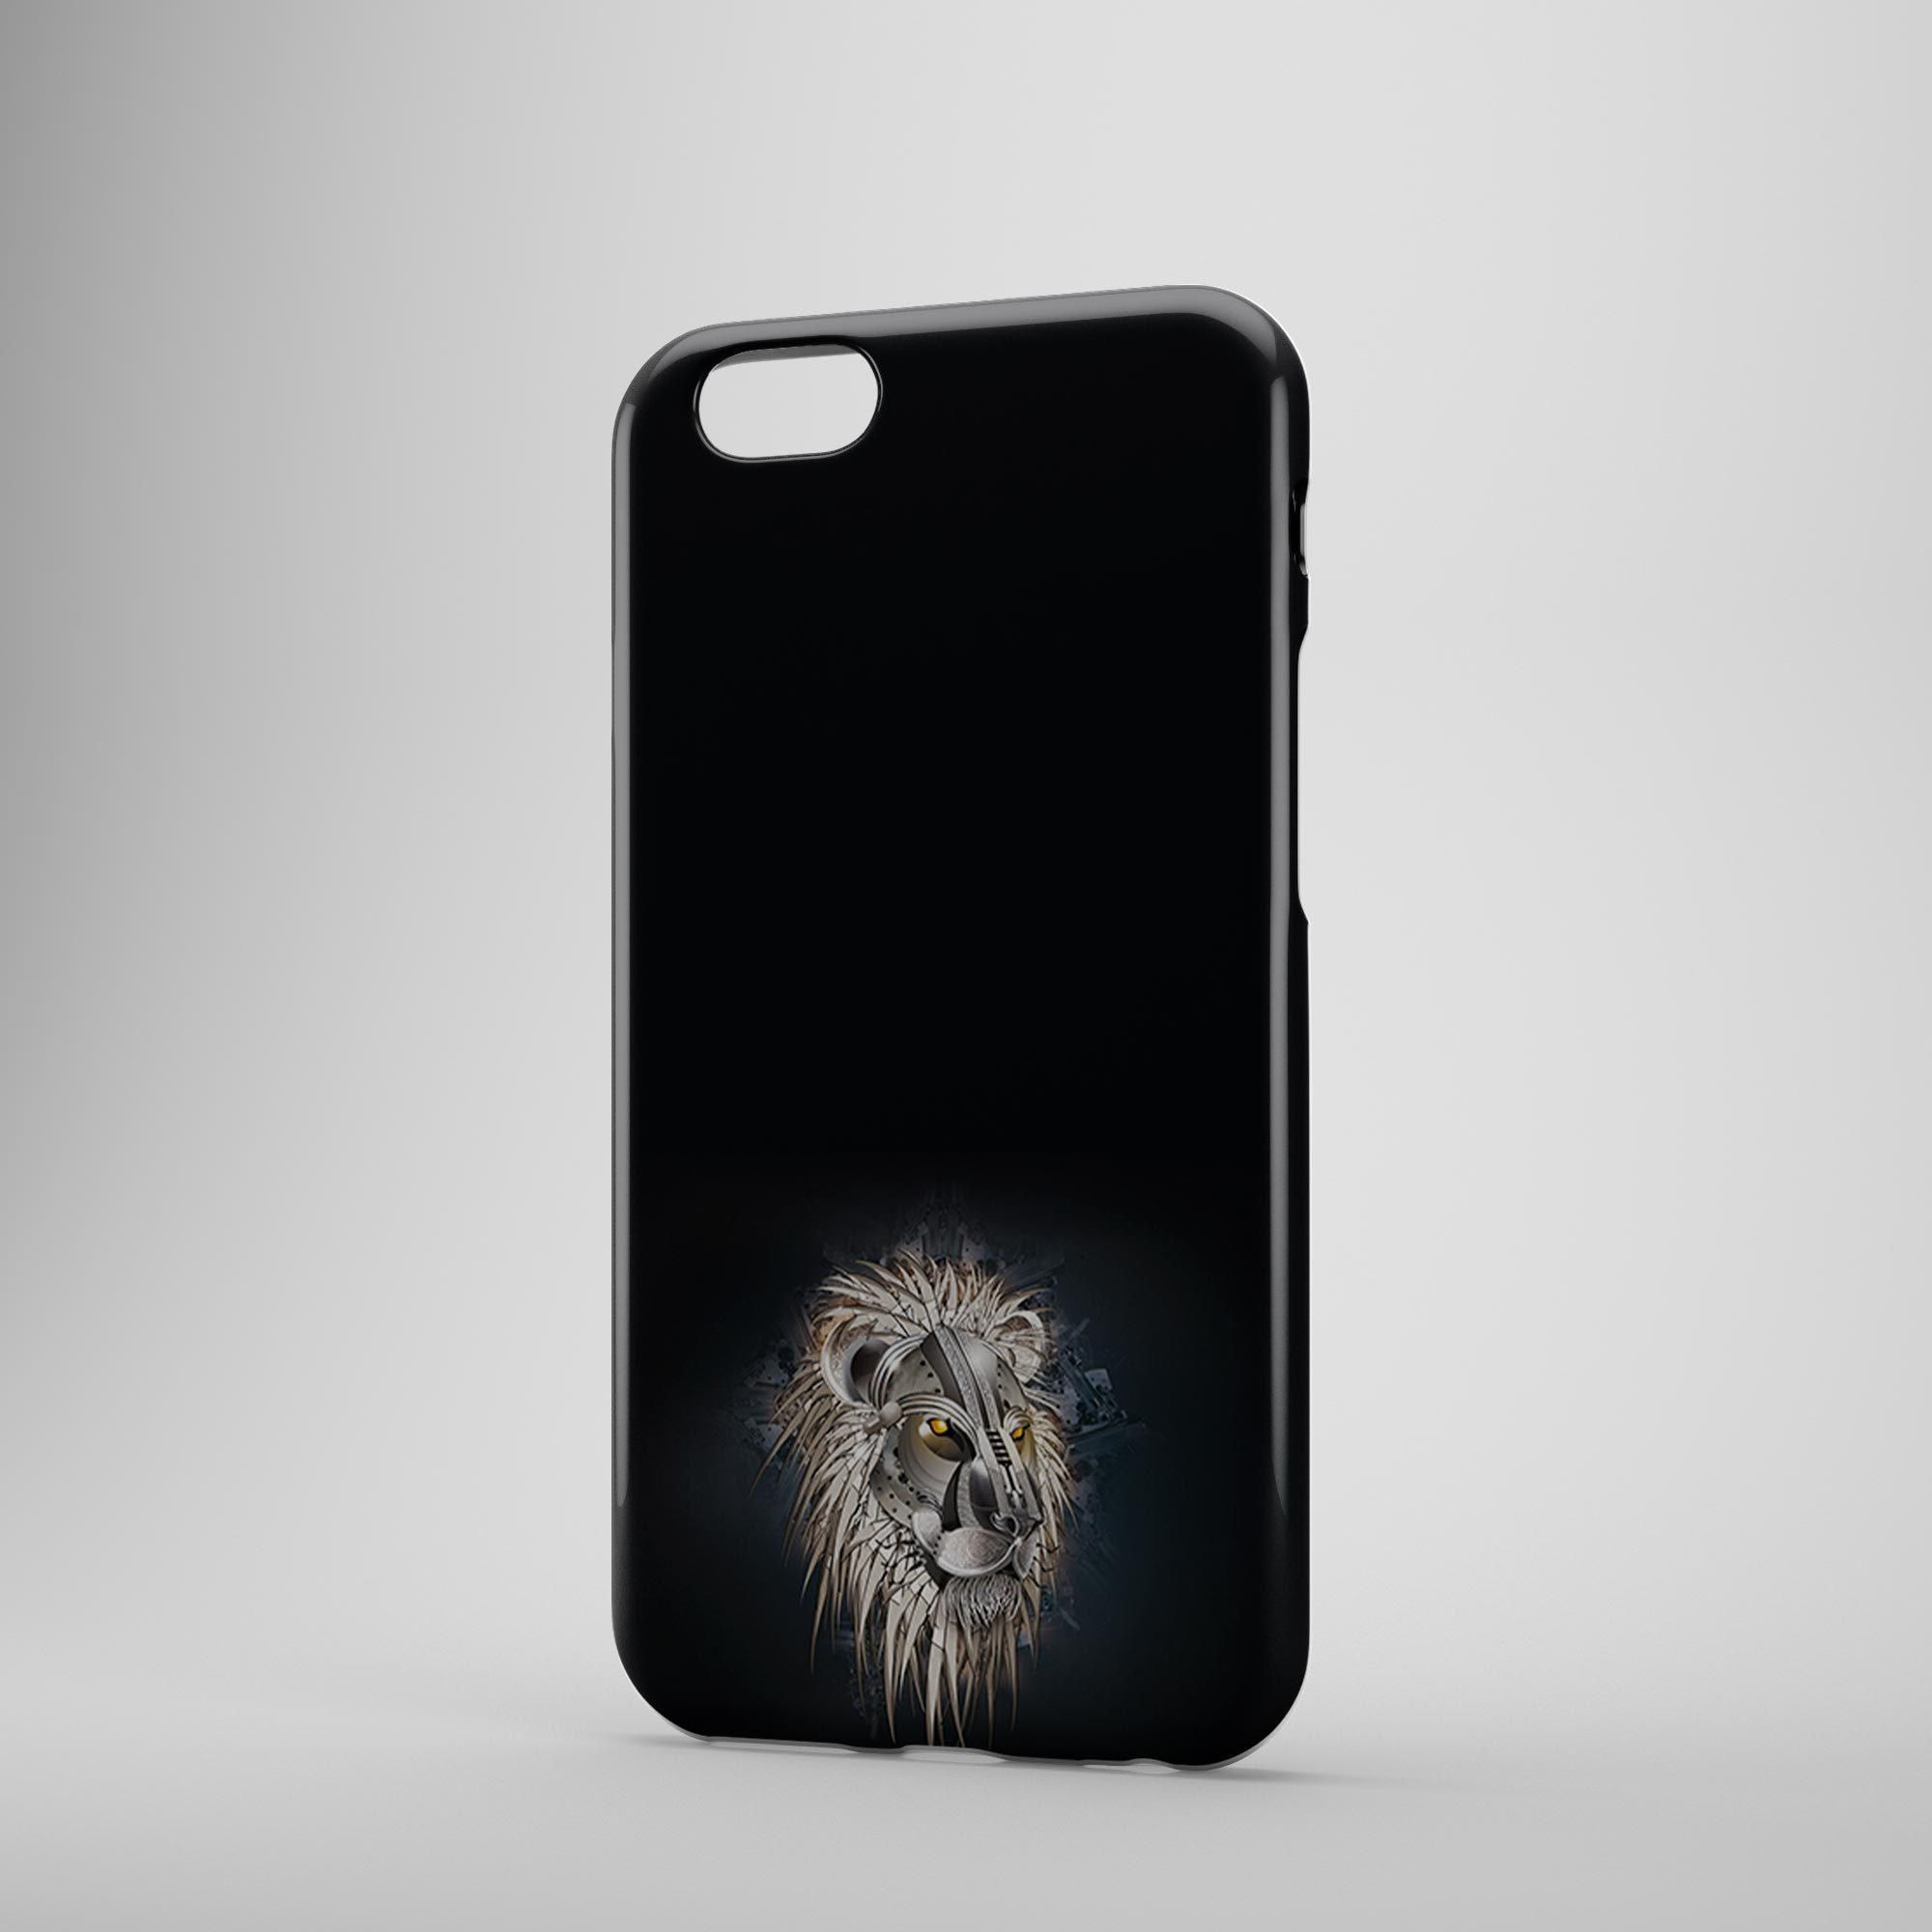 AfricanGolden Eyes Black Dark Lion Phone Case Cover for iPhone 7 Plus